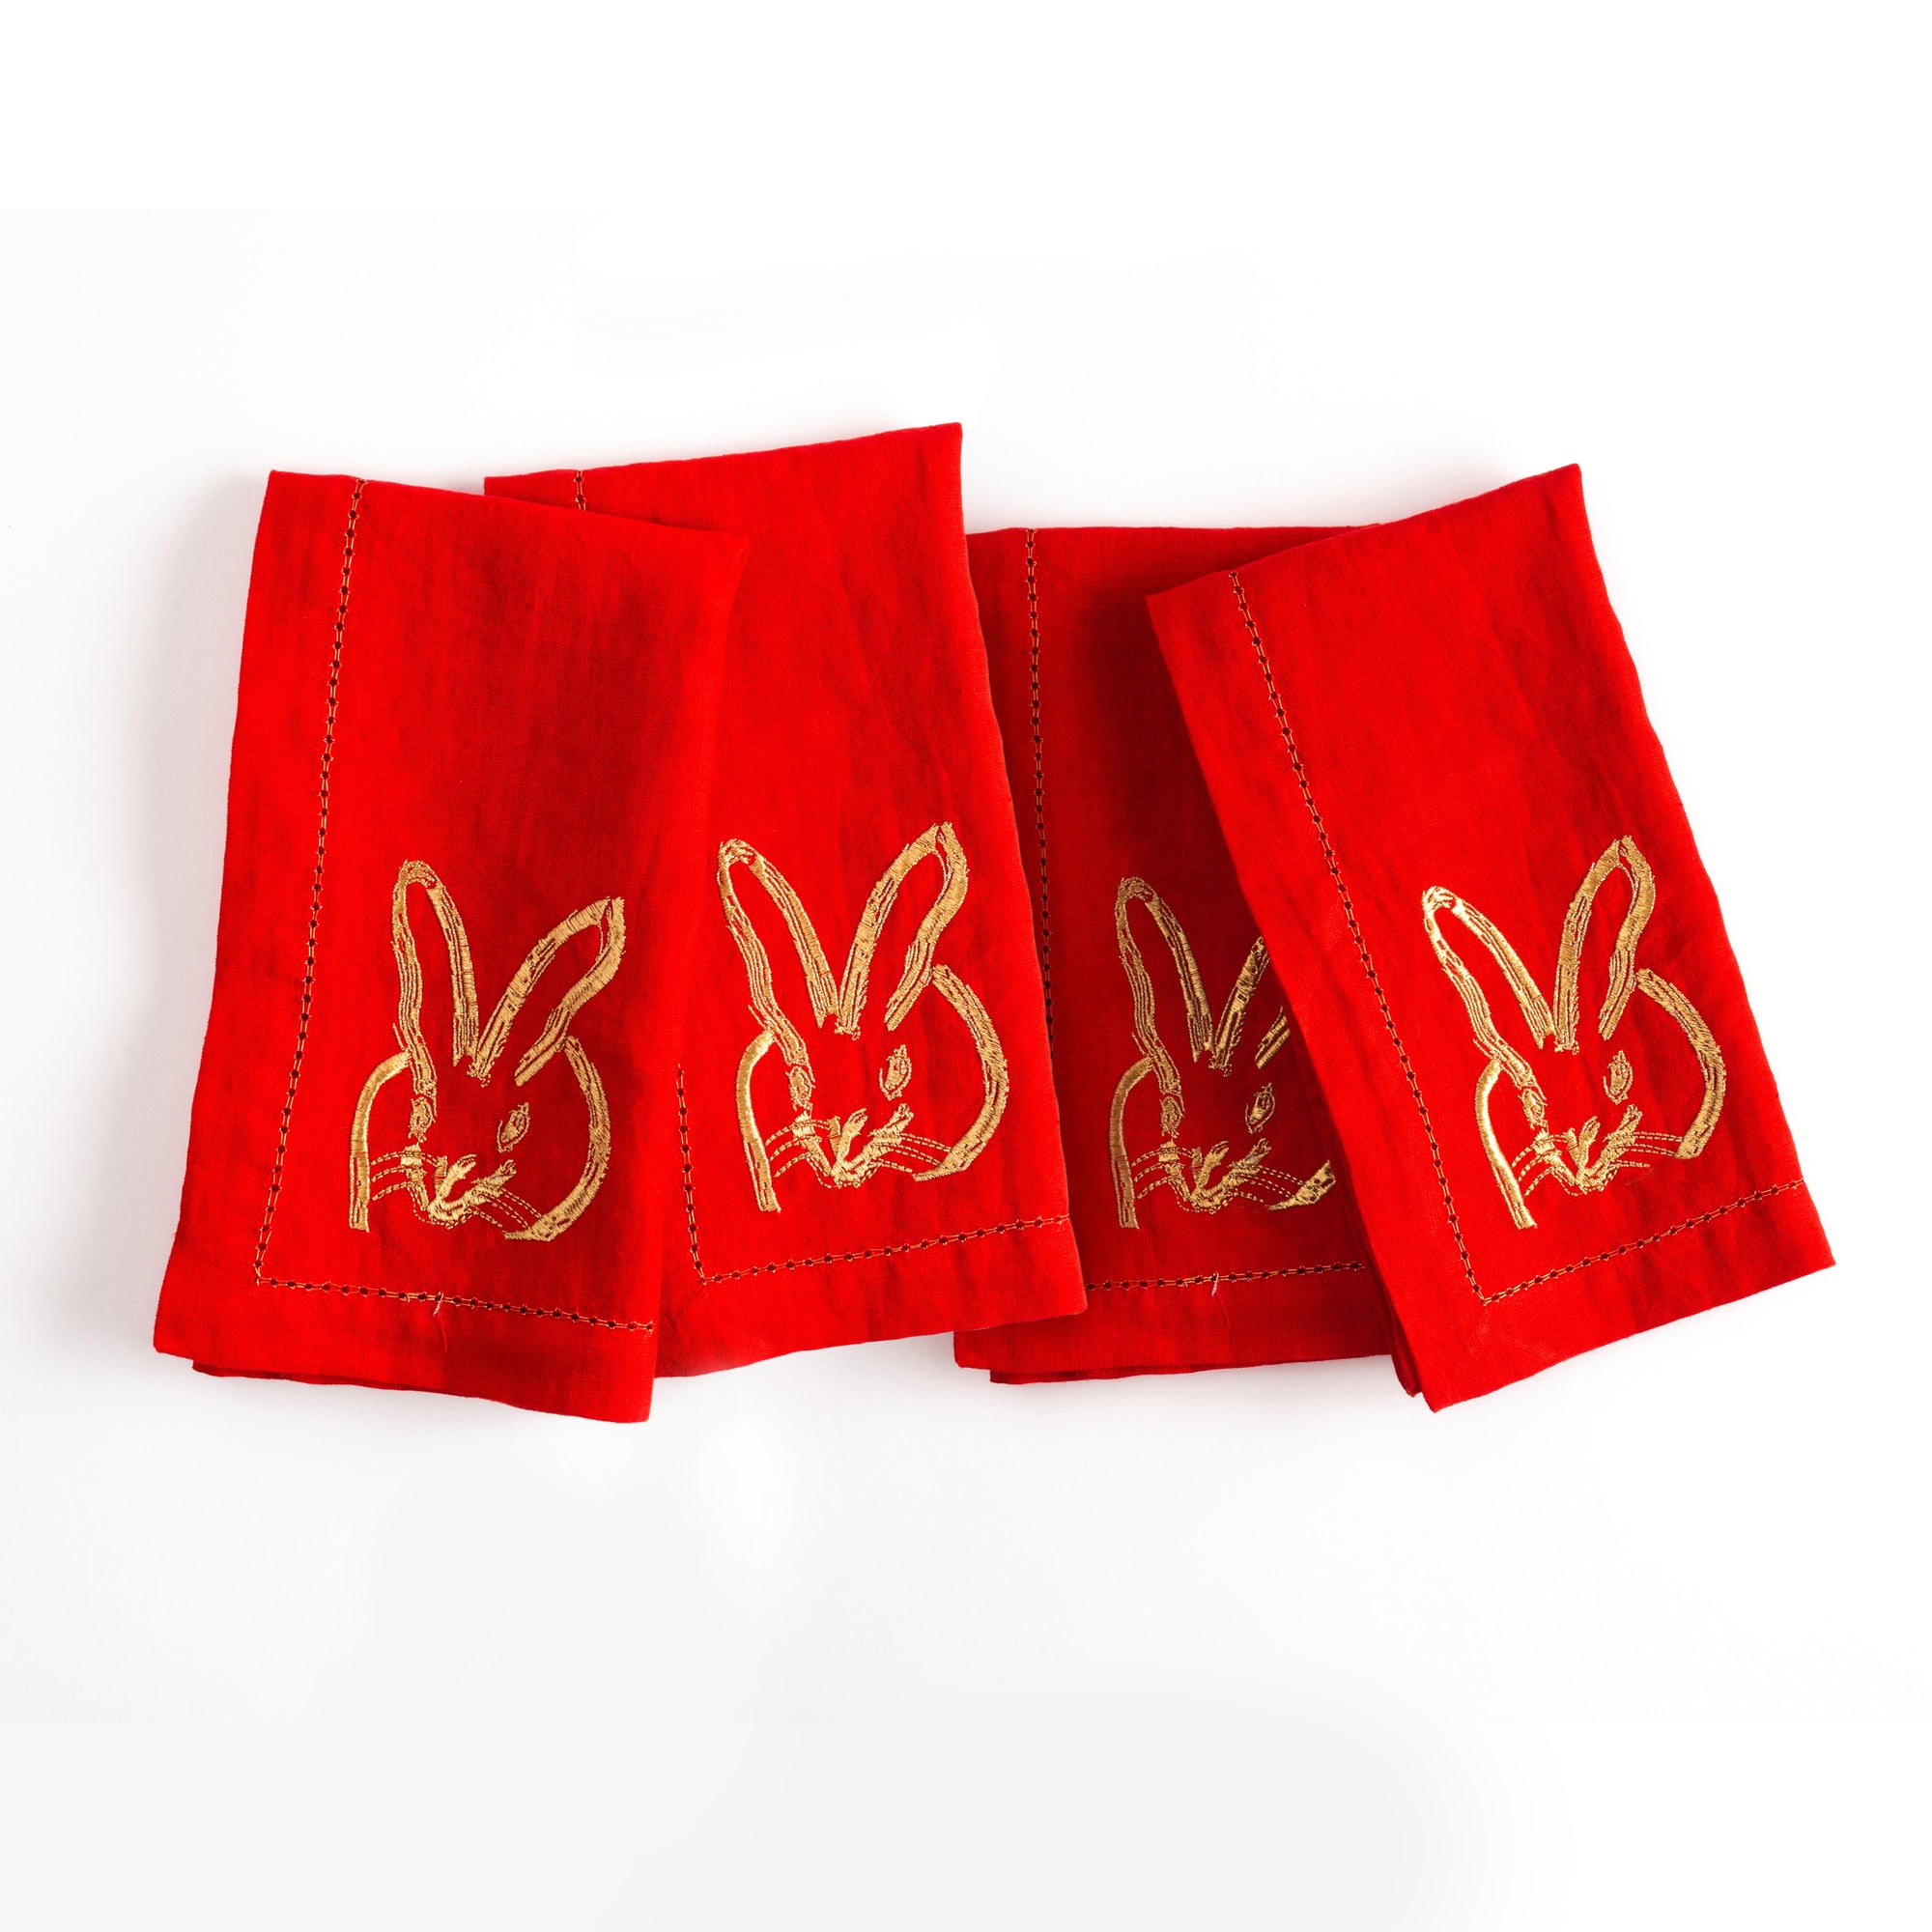 Painted Bunny Embroidered Linen Dinner Napkin, Red with Gold, Set